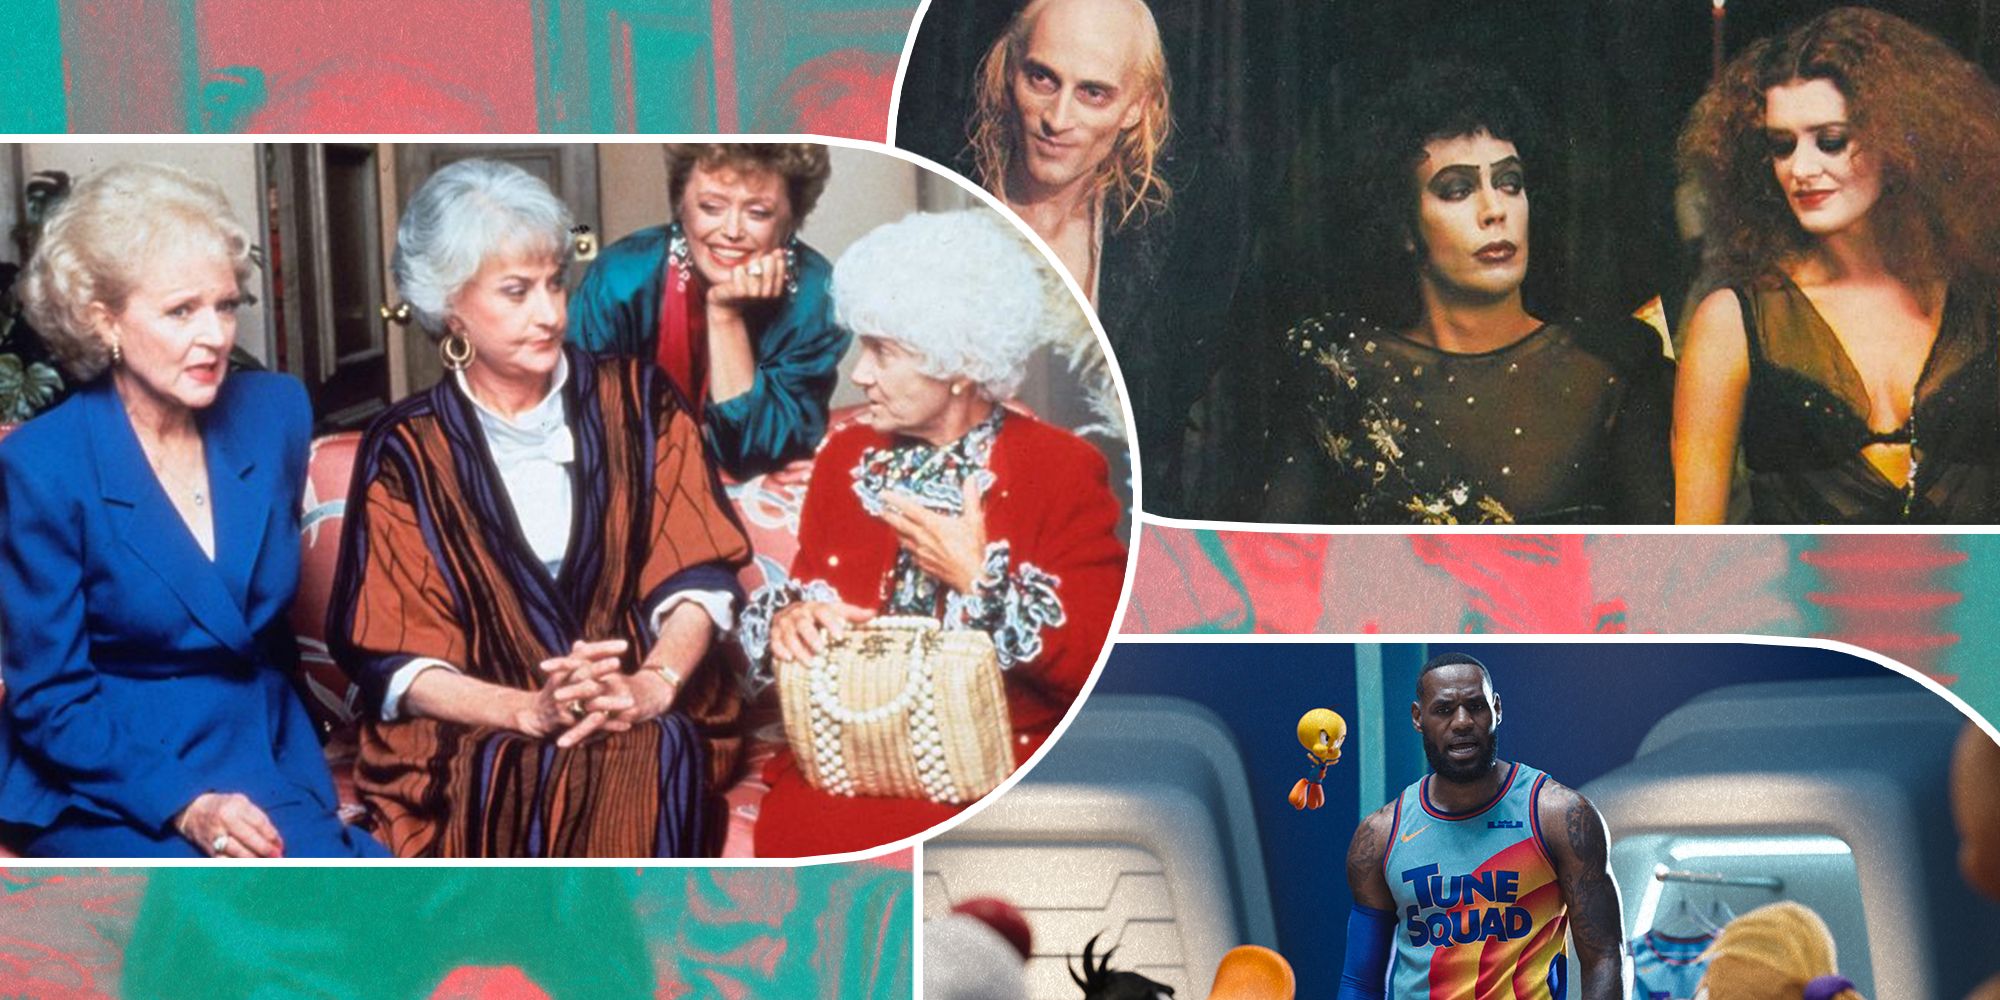 golden girls, rocky horror picture show, space jam new legacy halloween costume ideas